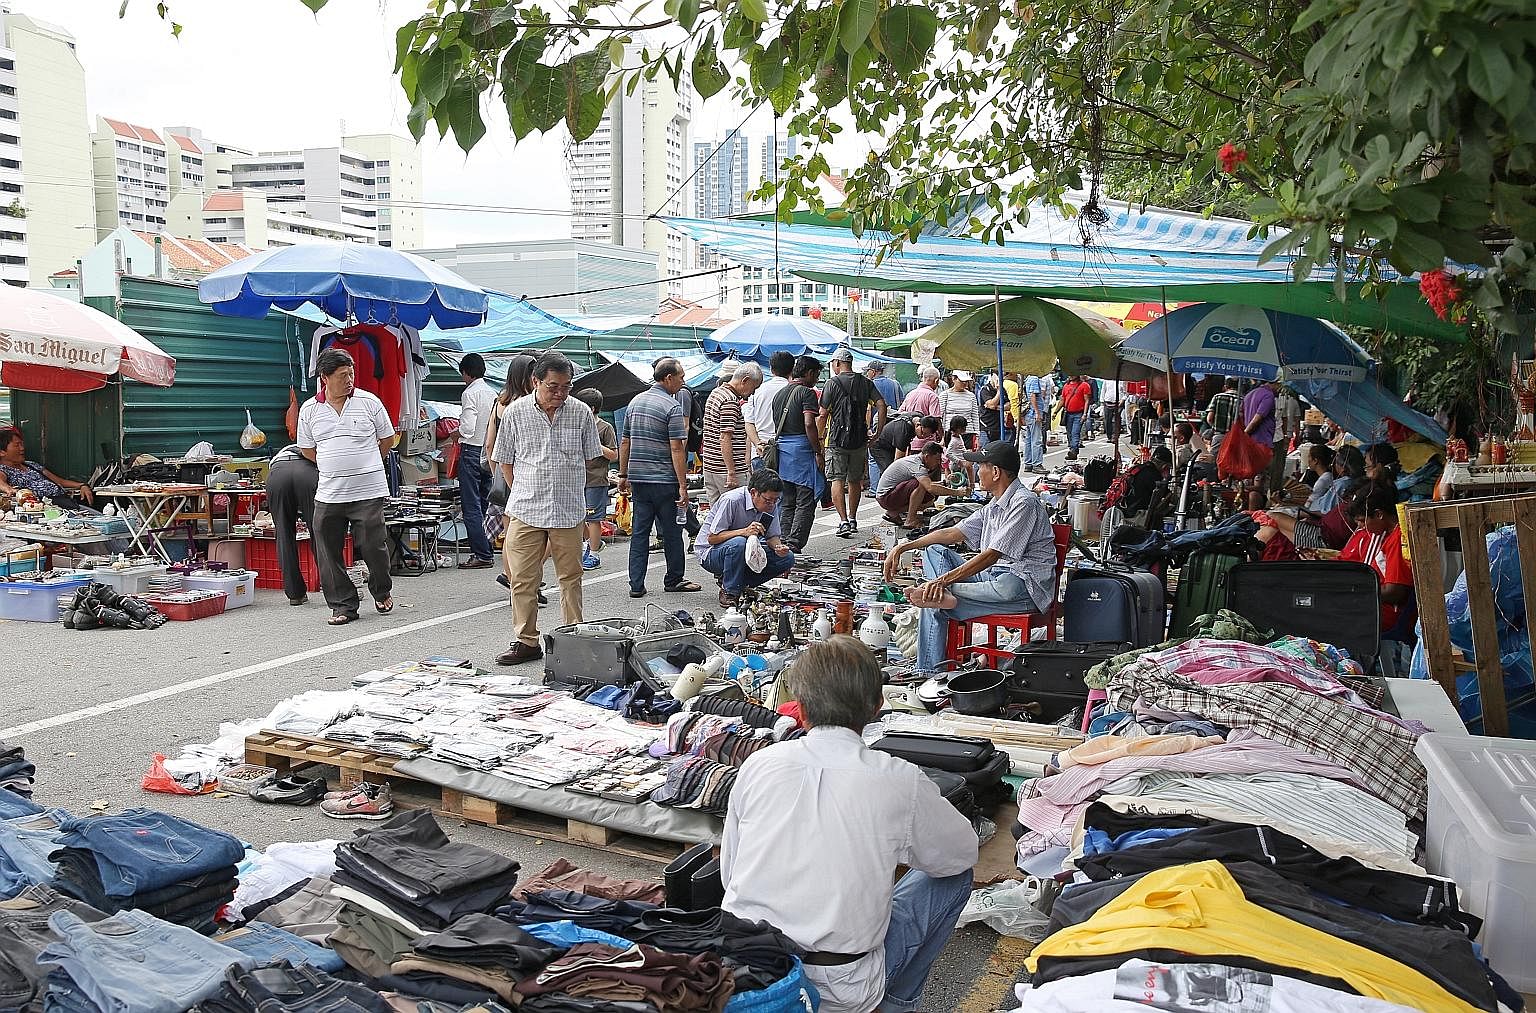 Above: The flea market has served as the go-to place for the underprivileged, filling a gap mainstream department stores and malls have been unable to plug.